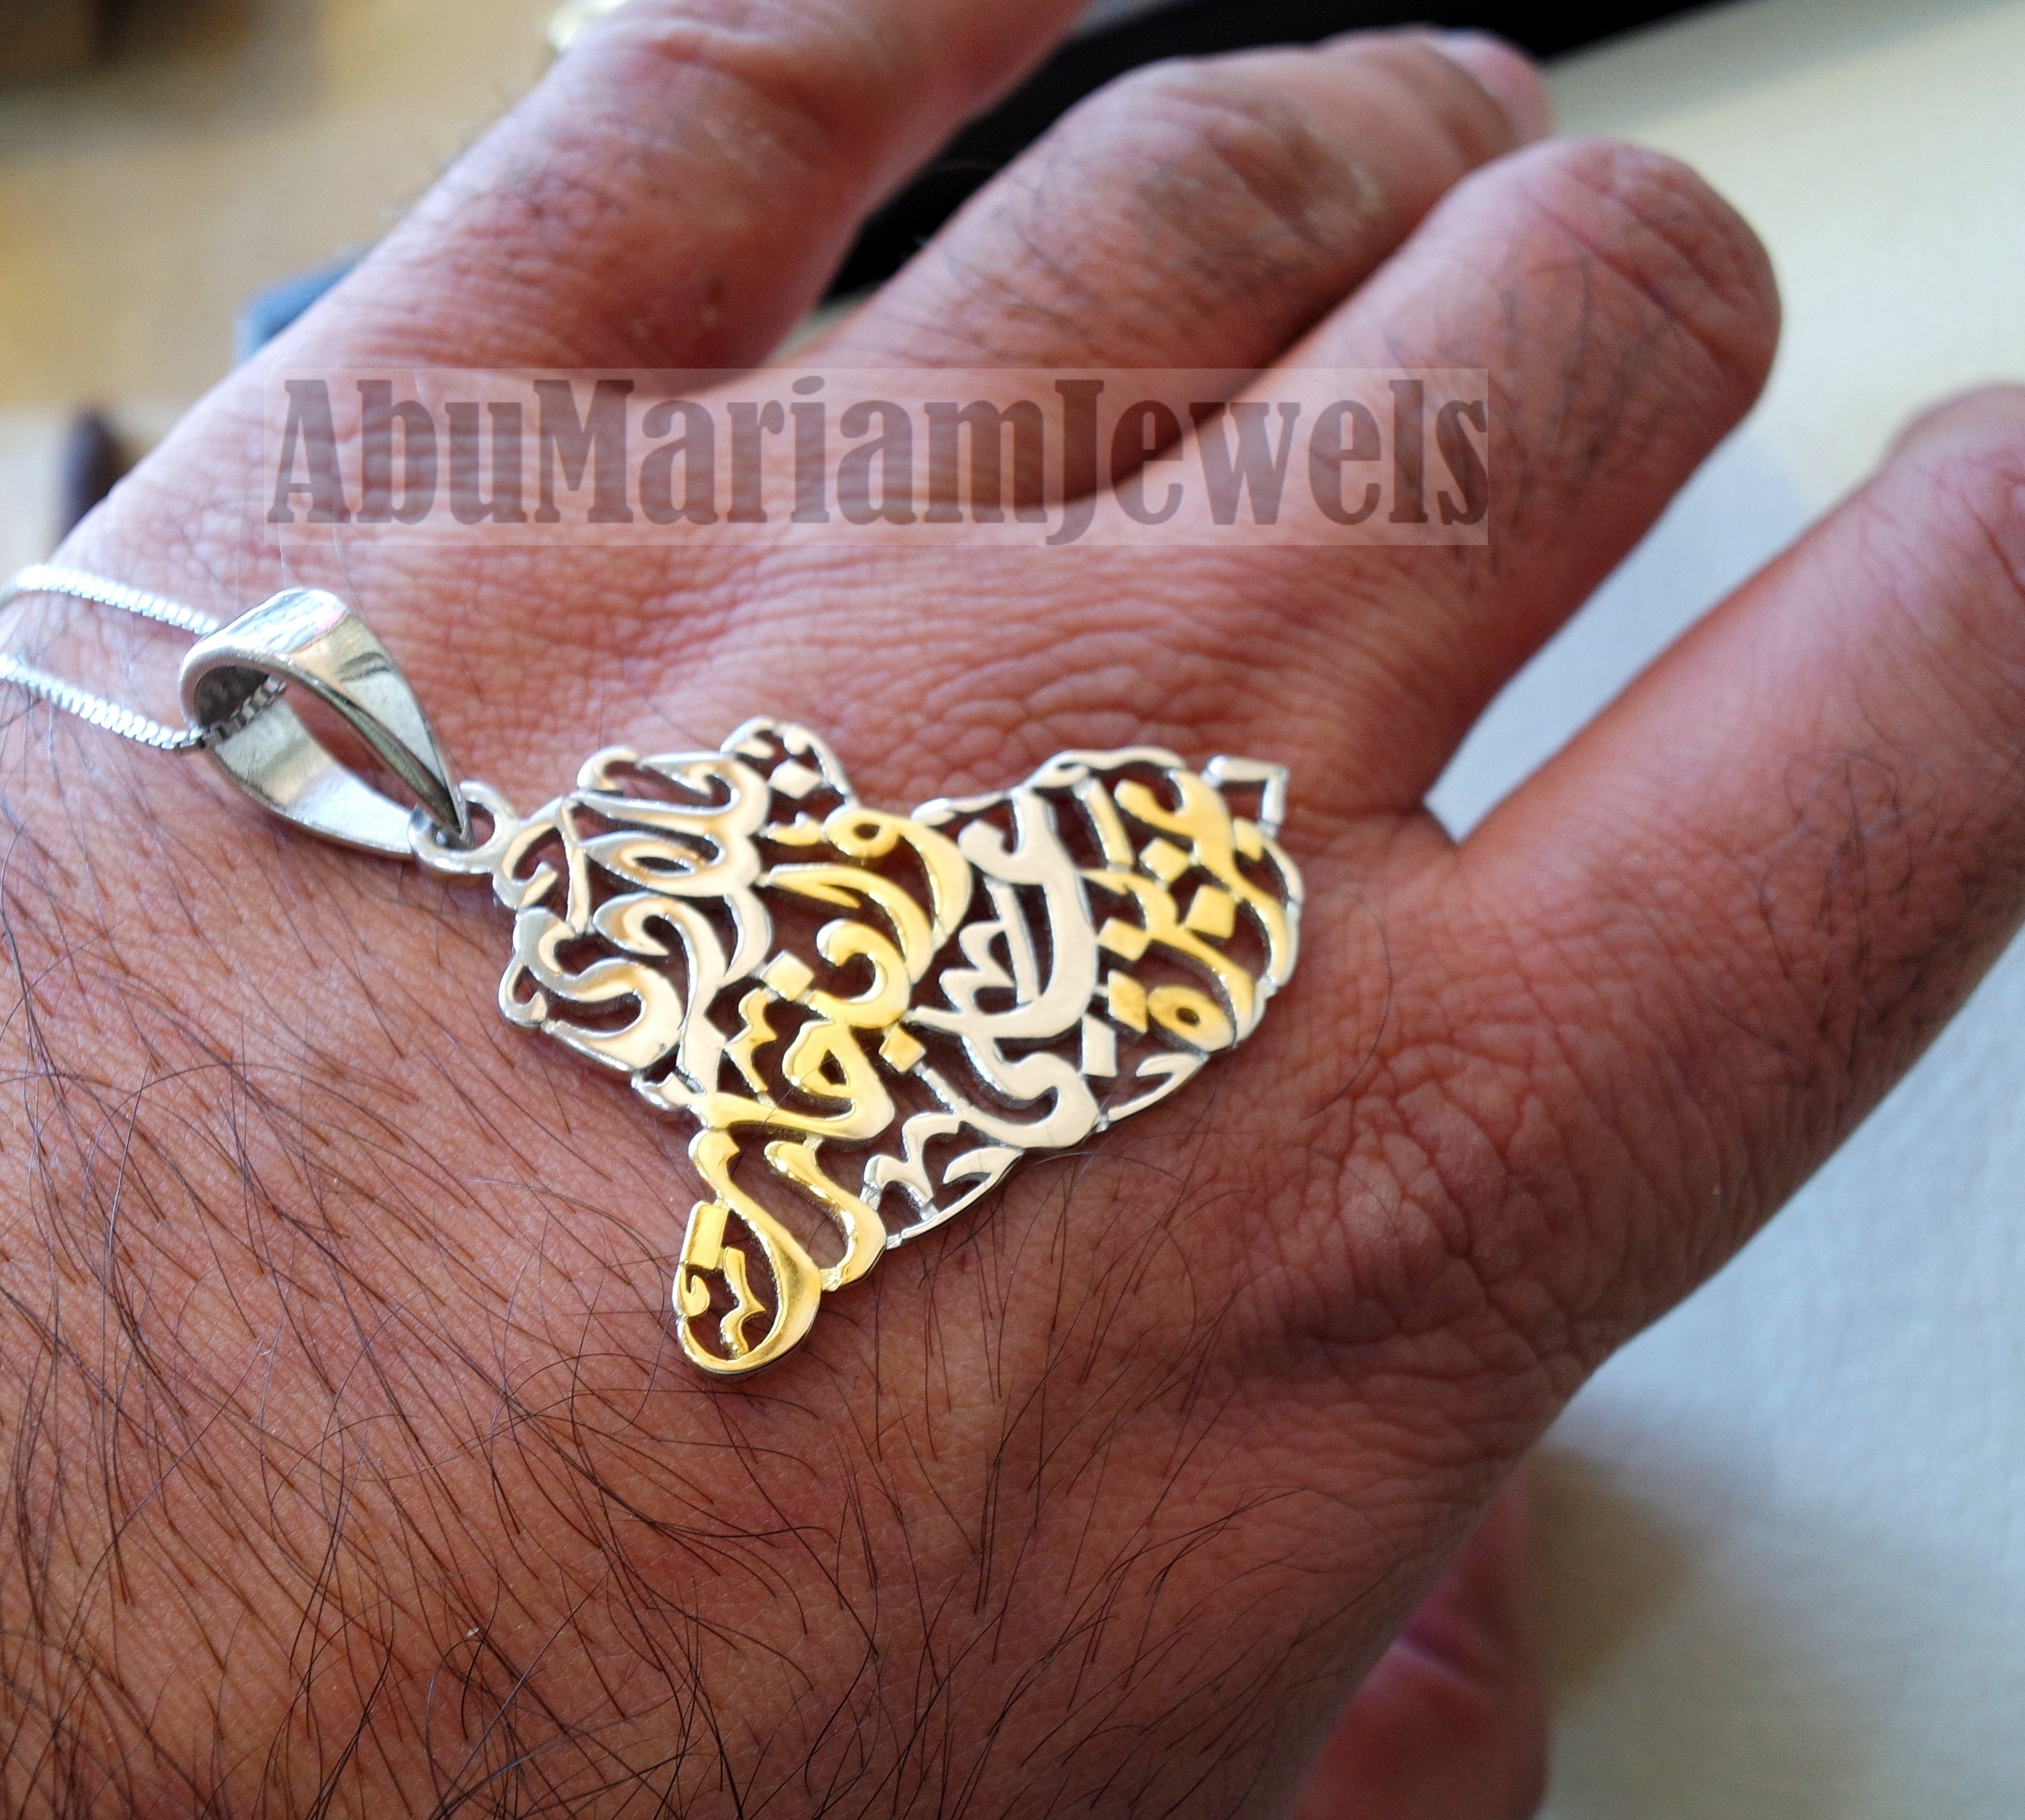 Iraq map pendant 2 tone and thick chain with famous poem verse sterling silver 925 with gold plating jewelry arabic خارطة العراق